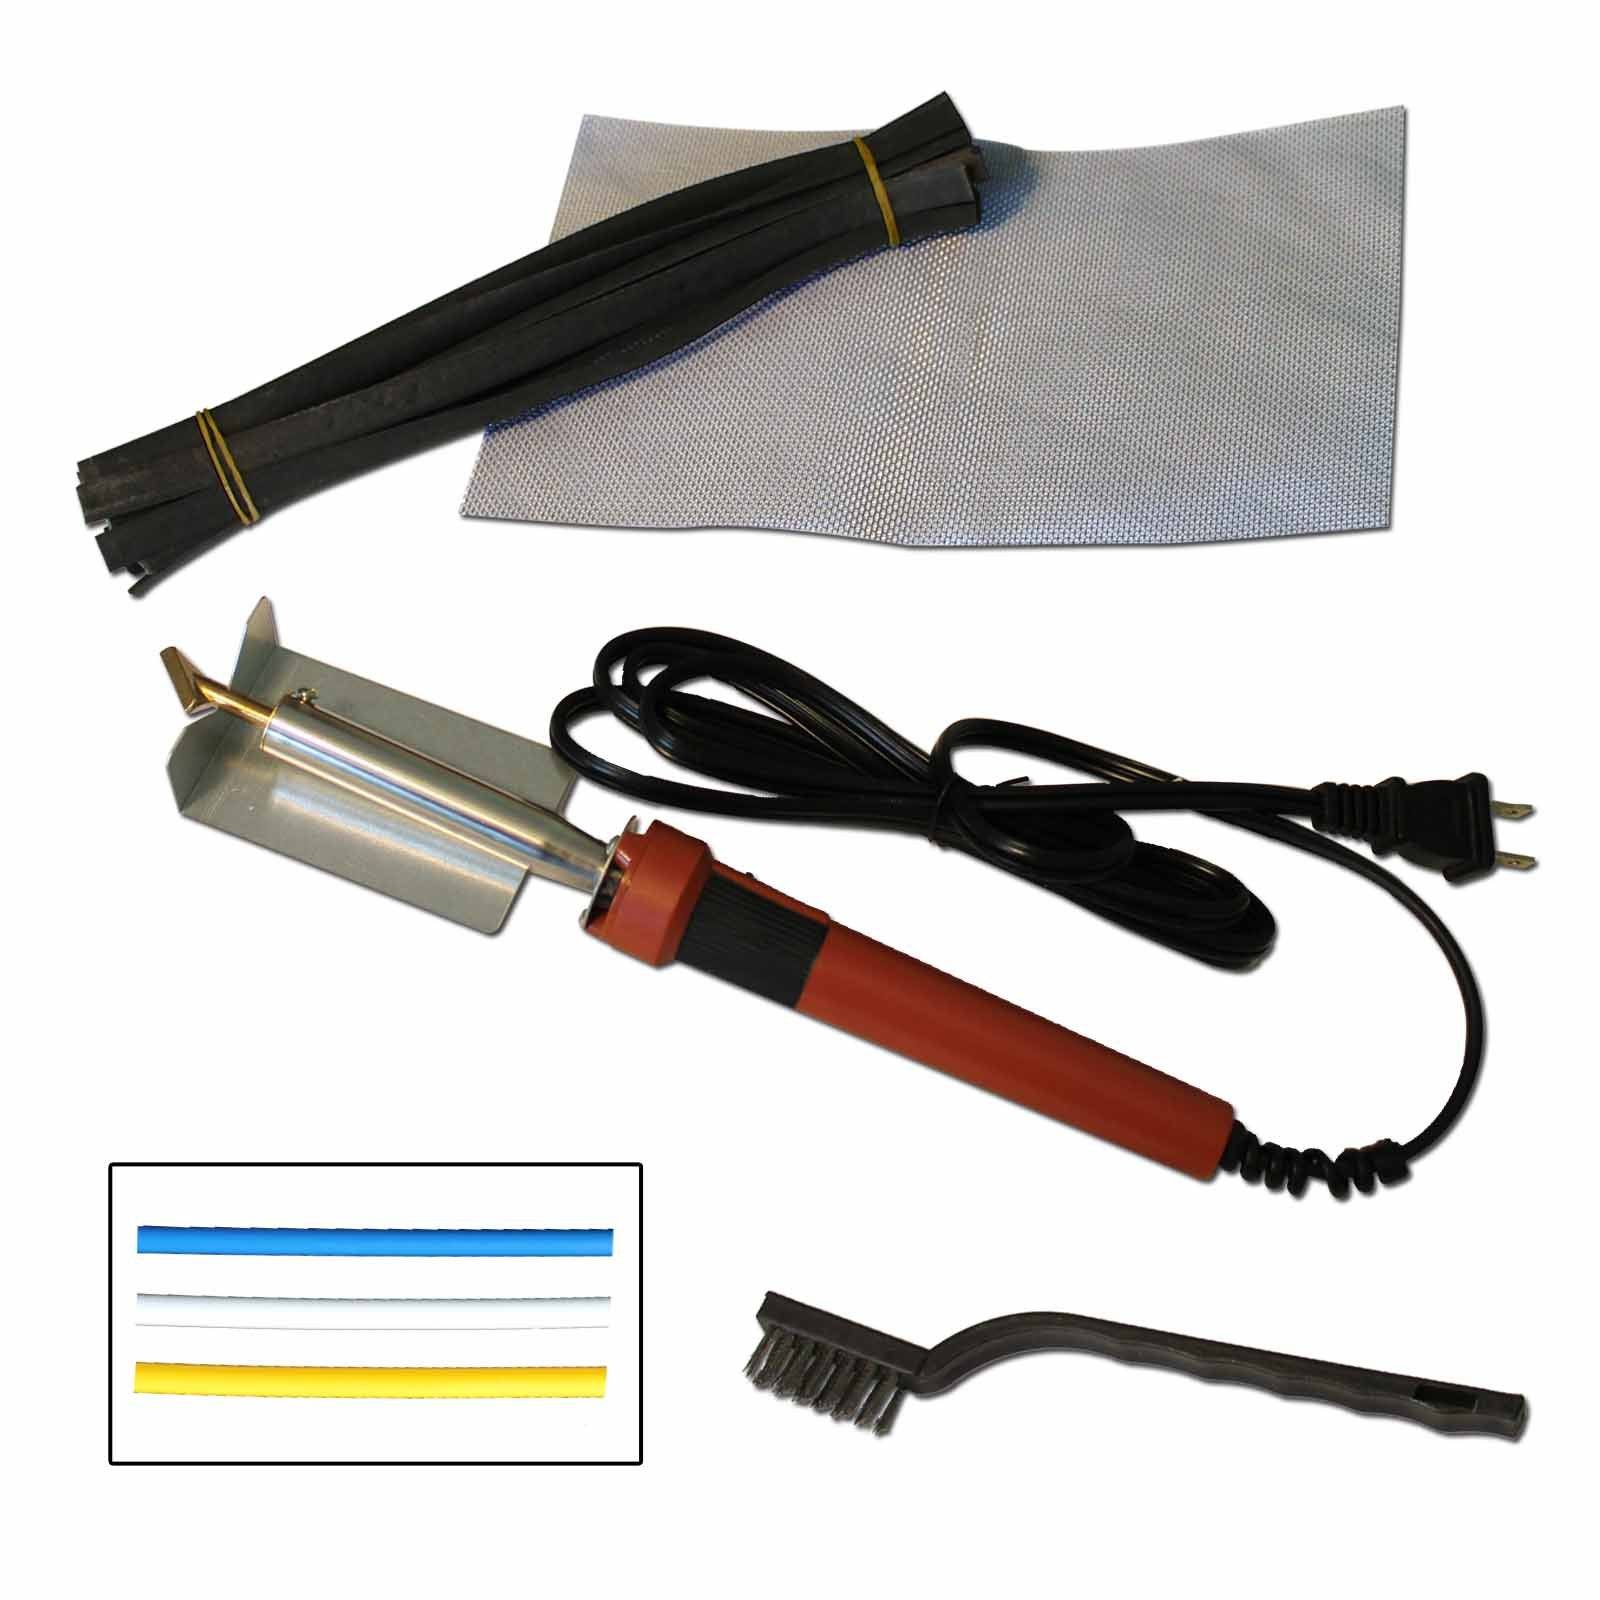 80 Watt Iron Plastic Welding Kit for WR17, WR16 or WR10/WRTango - Choose From White, Blue, or Yellow Plastic Rod - WindRider